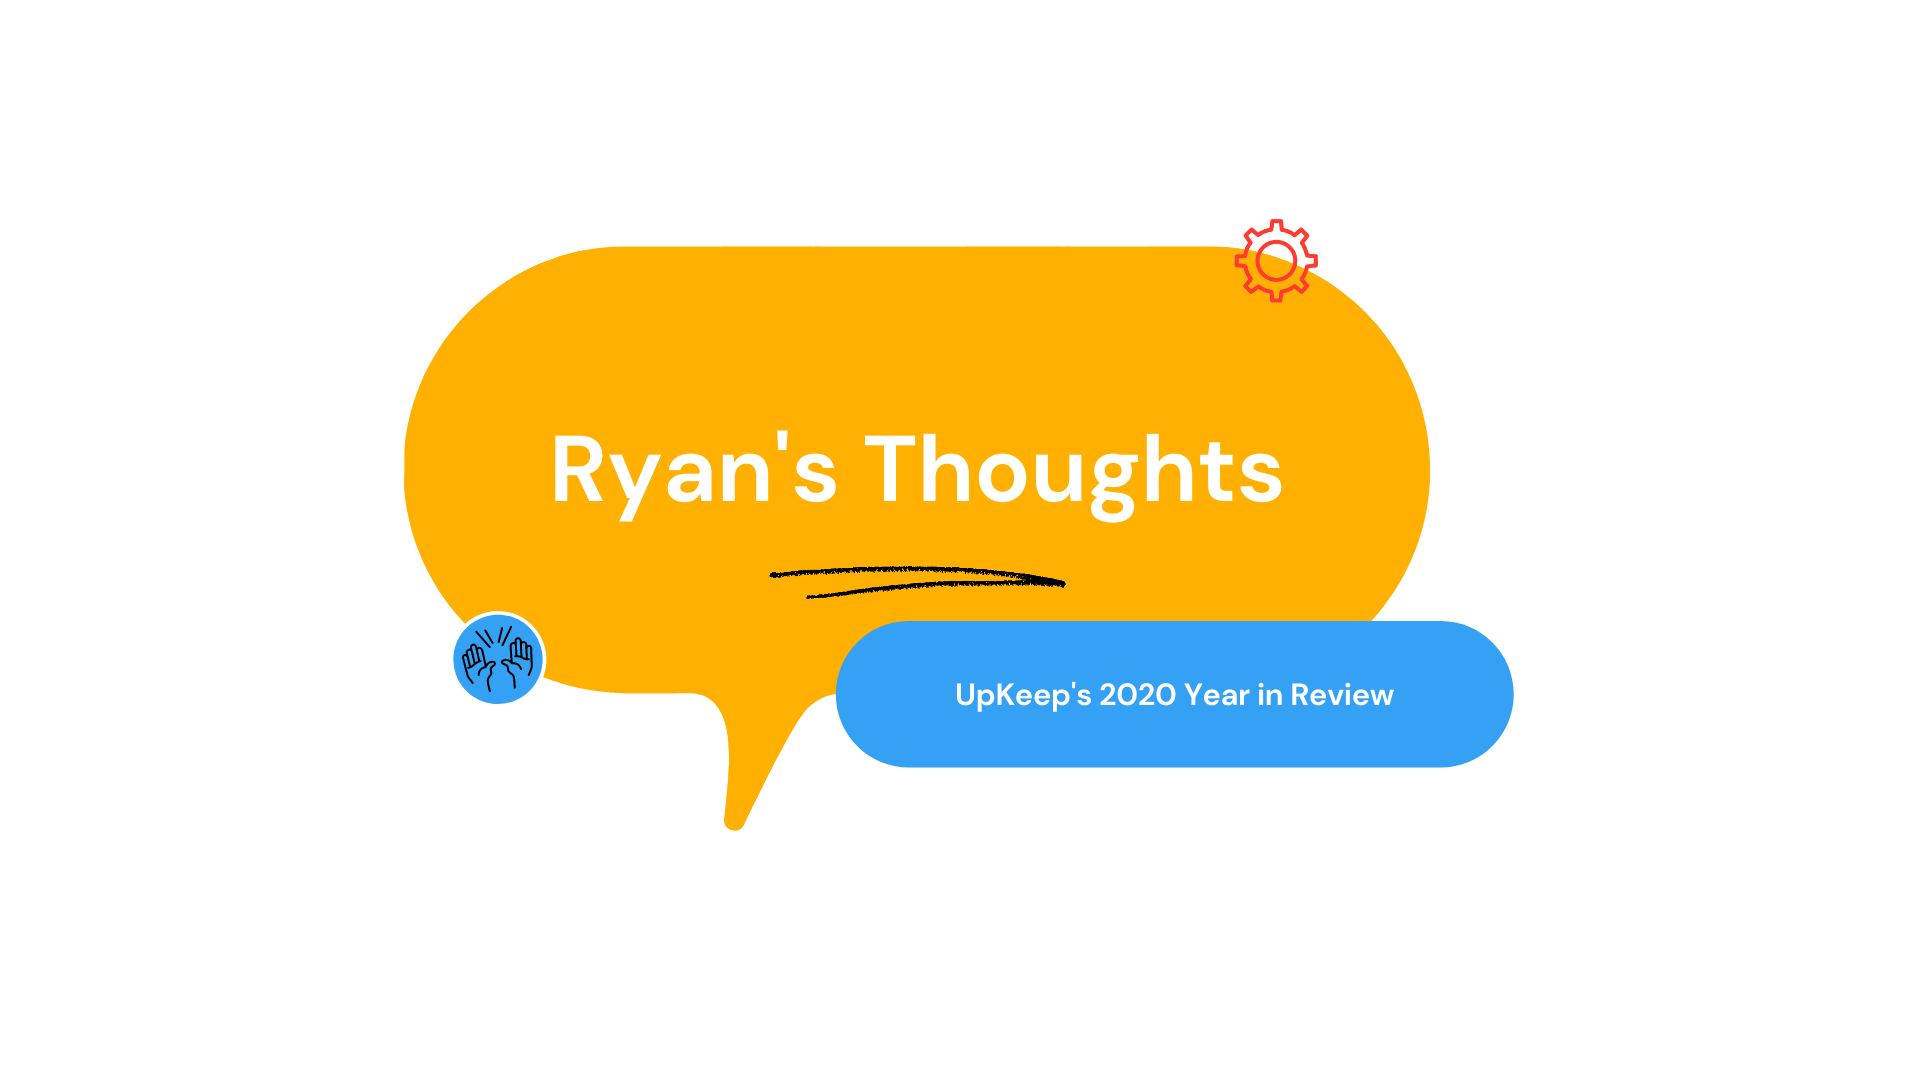 Ryan's Thoughts: UpKeep's 2020 Year in Review